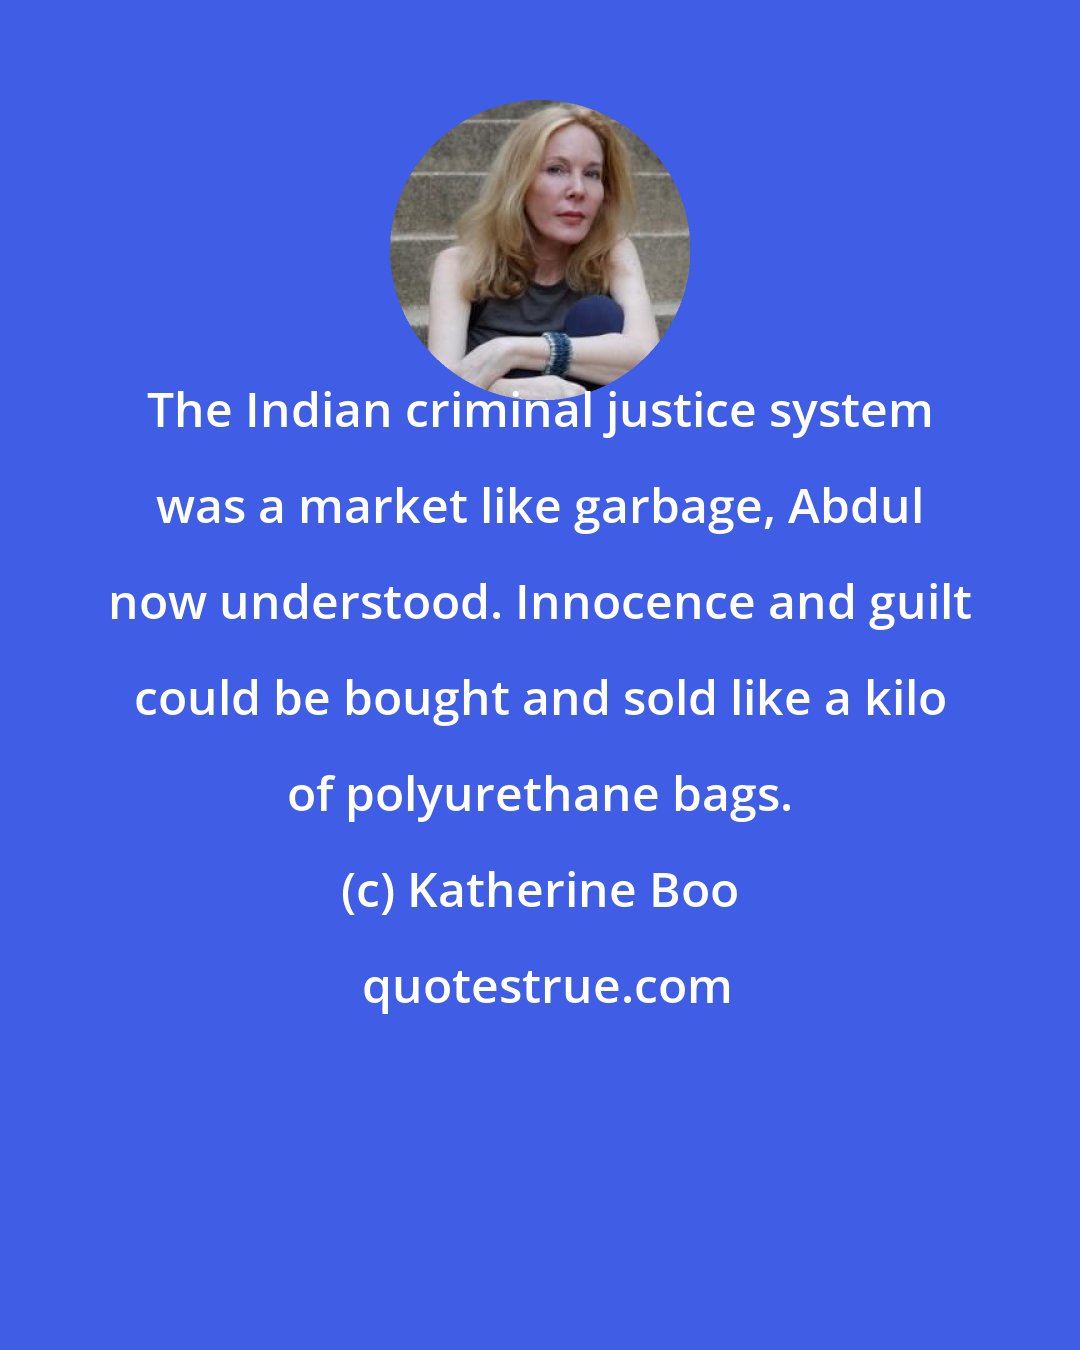 Katherine Boo: The Indian criminal justice system was a market like garbage, Abdul now understood. Innocence and guilt could be bought and sold like a kilo of polyurethane bags.